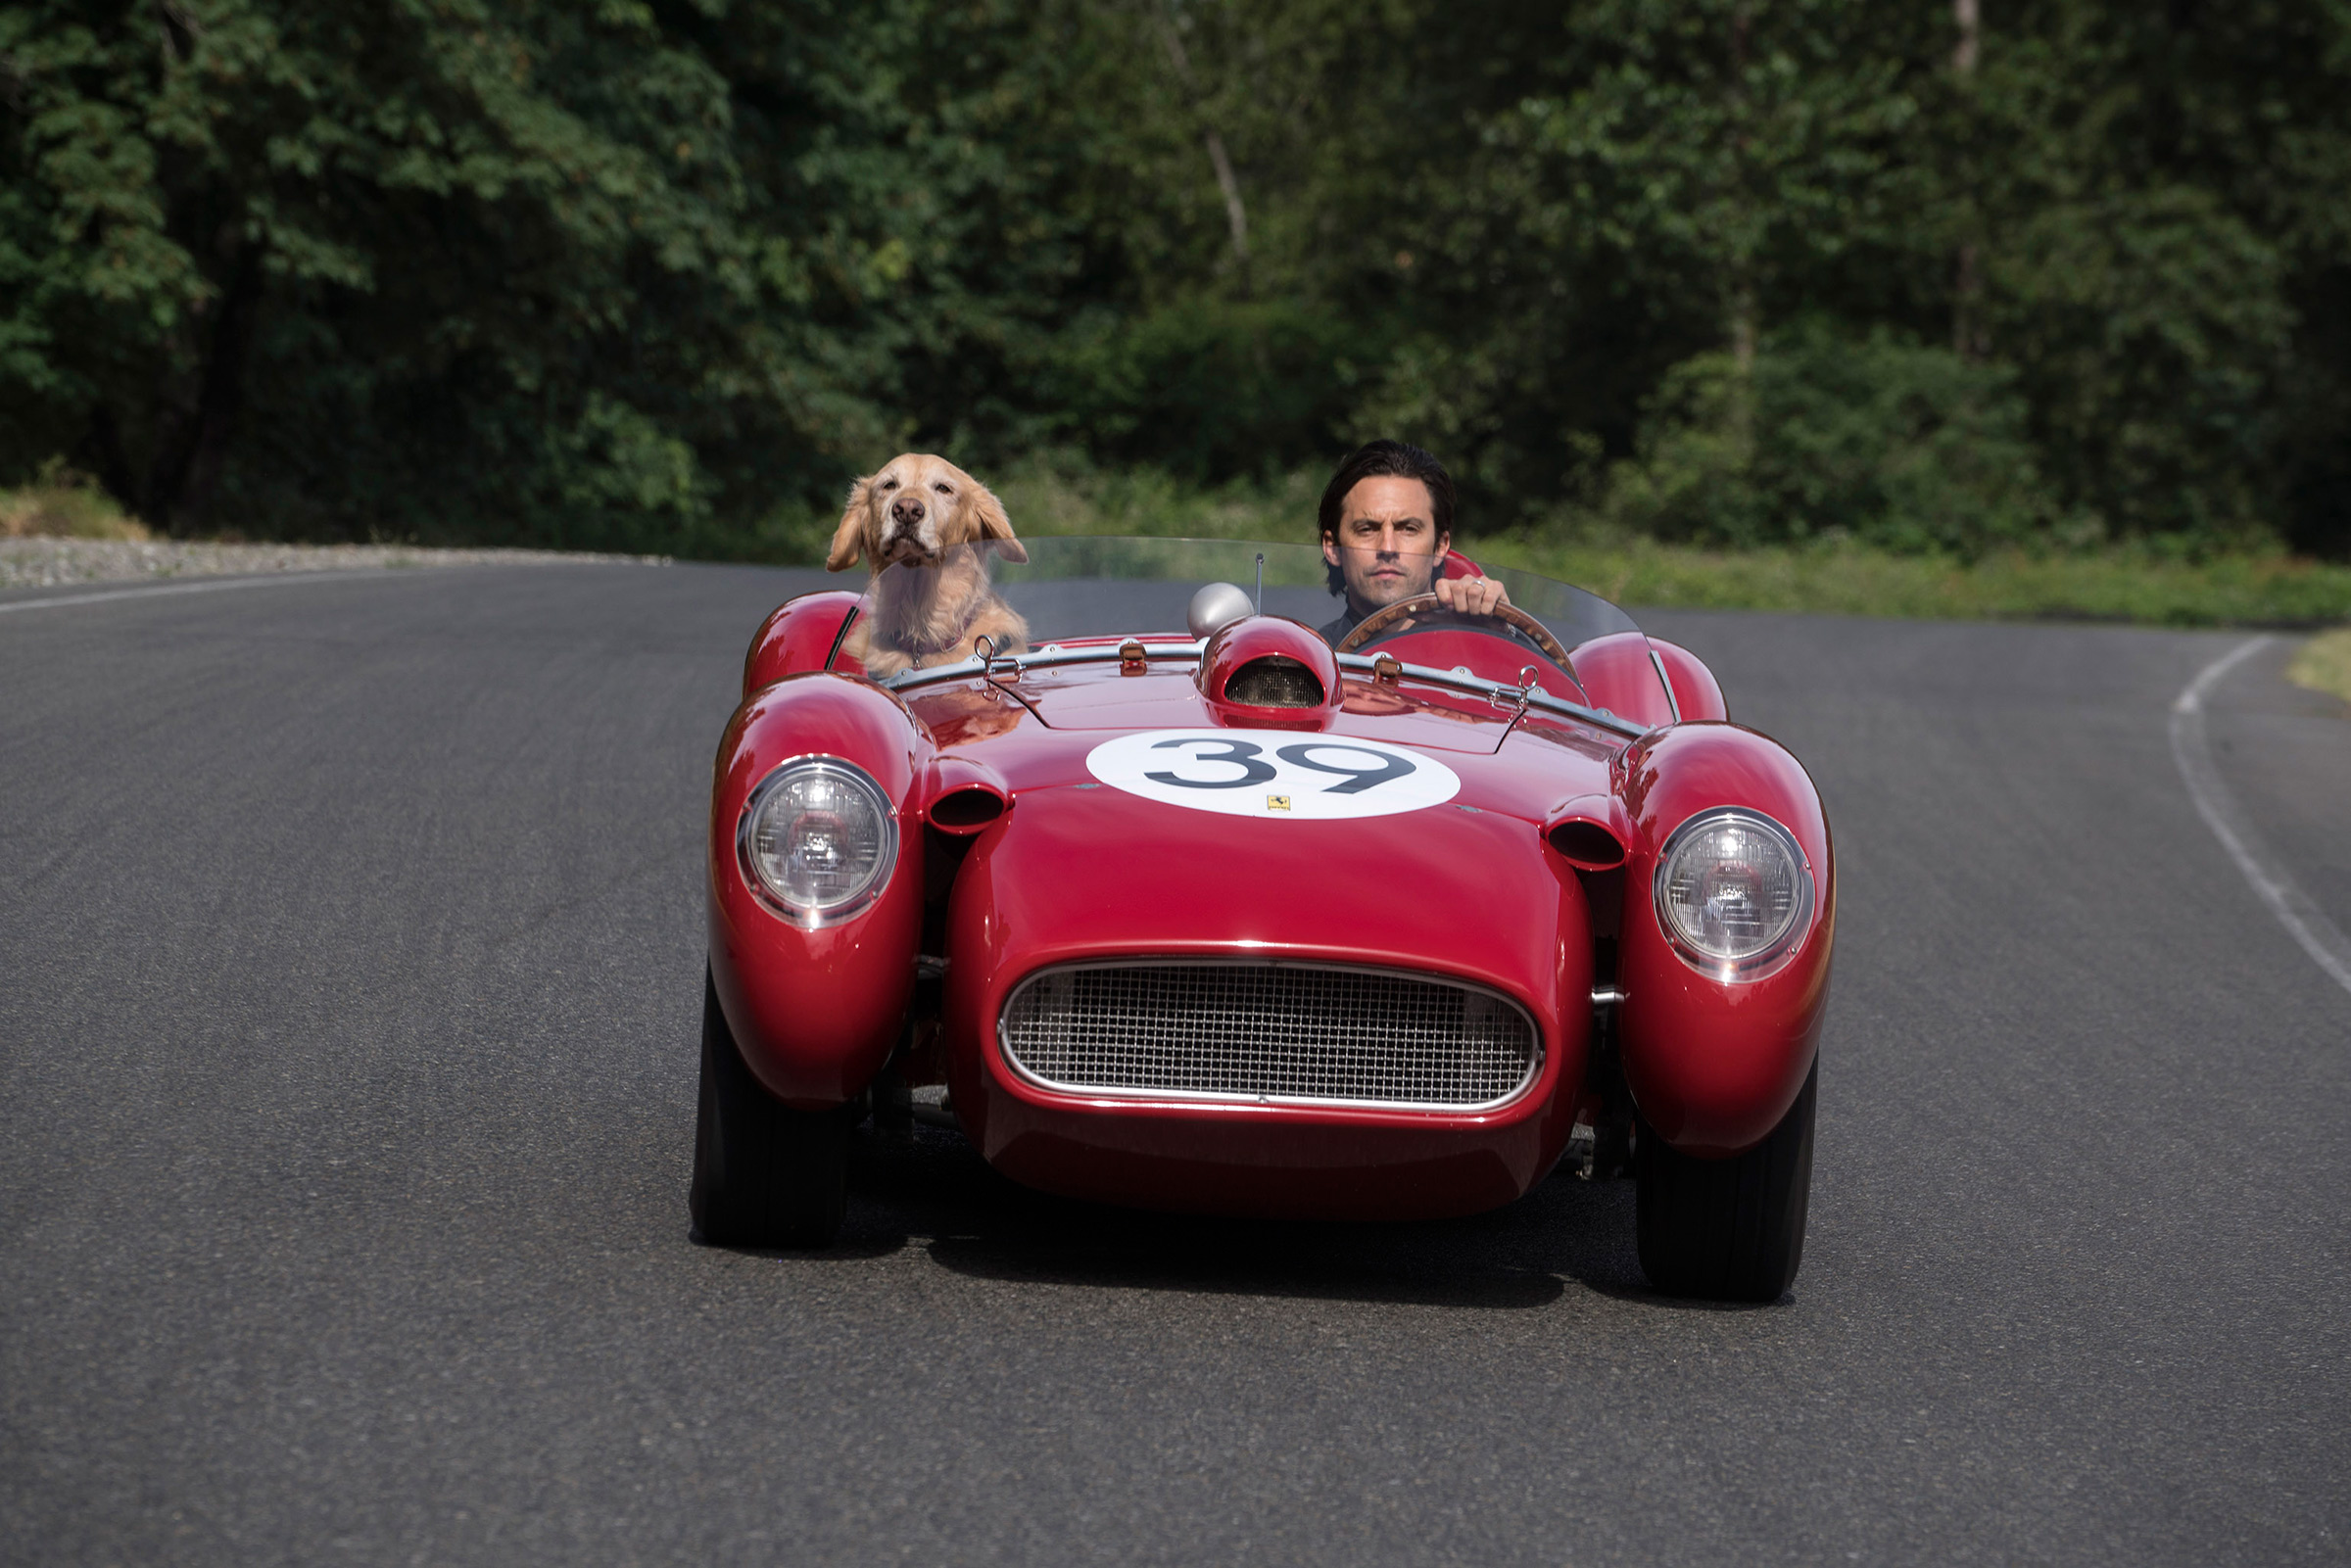 Ventimiglia and friend: If only dogs could drive! And also make movies. (20th Century Fox)